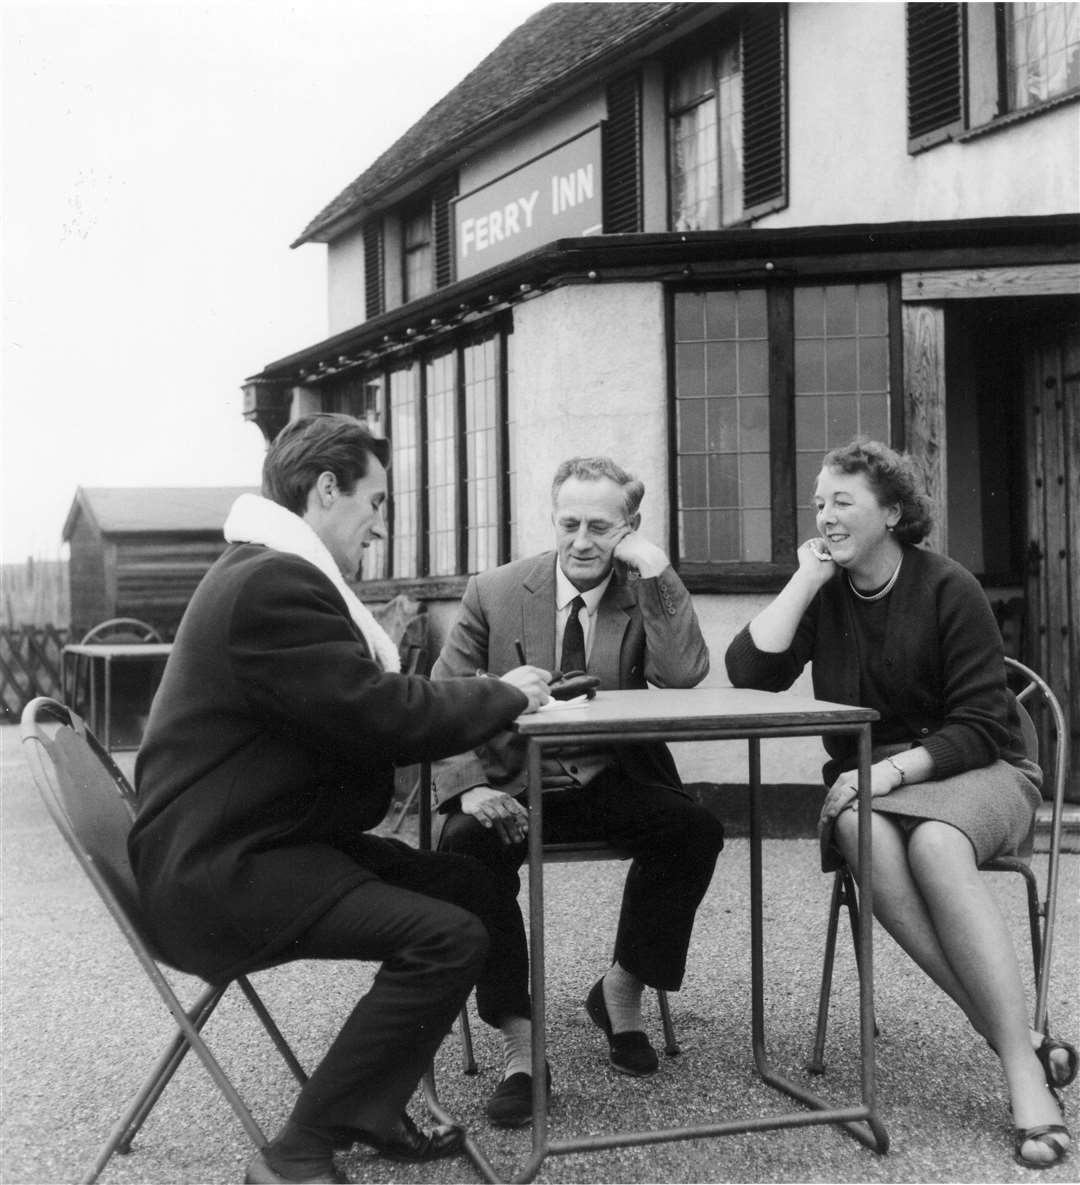 John Rogers, left, interviewing Ben and Vera Fowler, owners of the Ferry Inn at Harty. Picture: The Rayner Collection